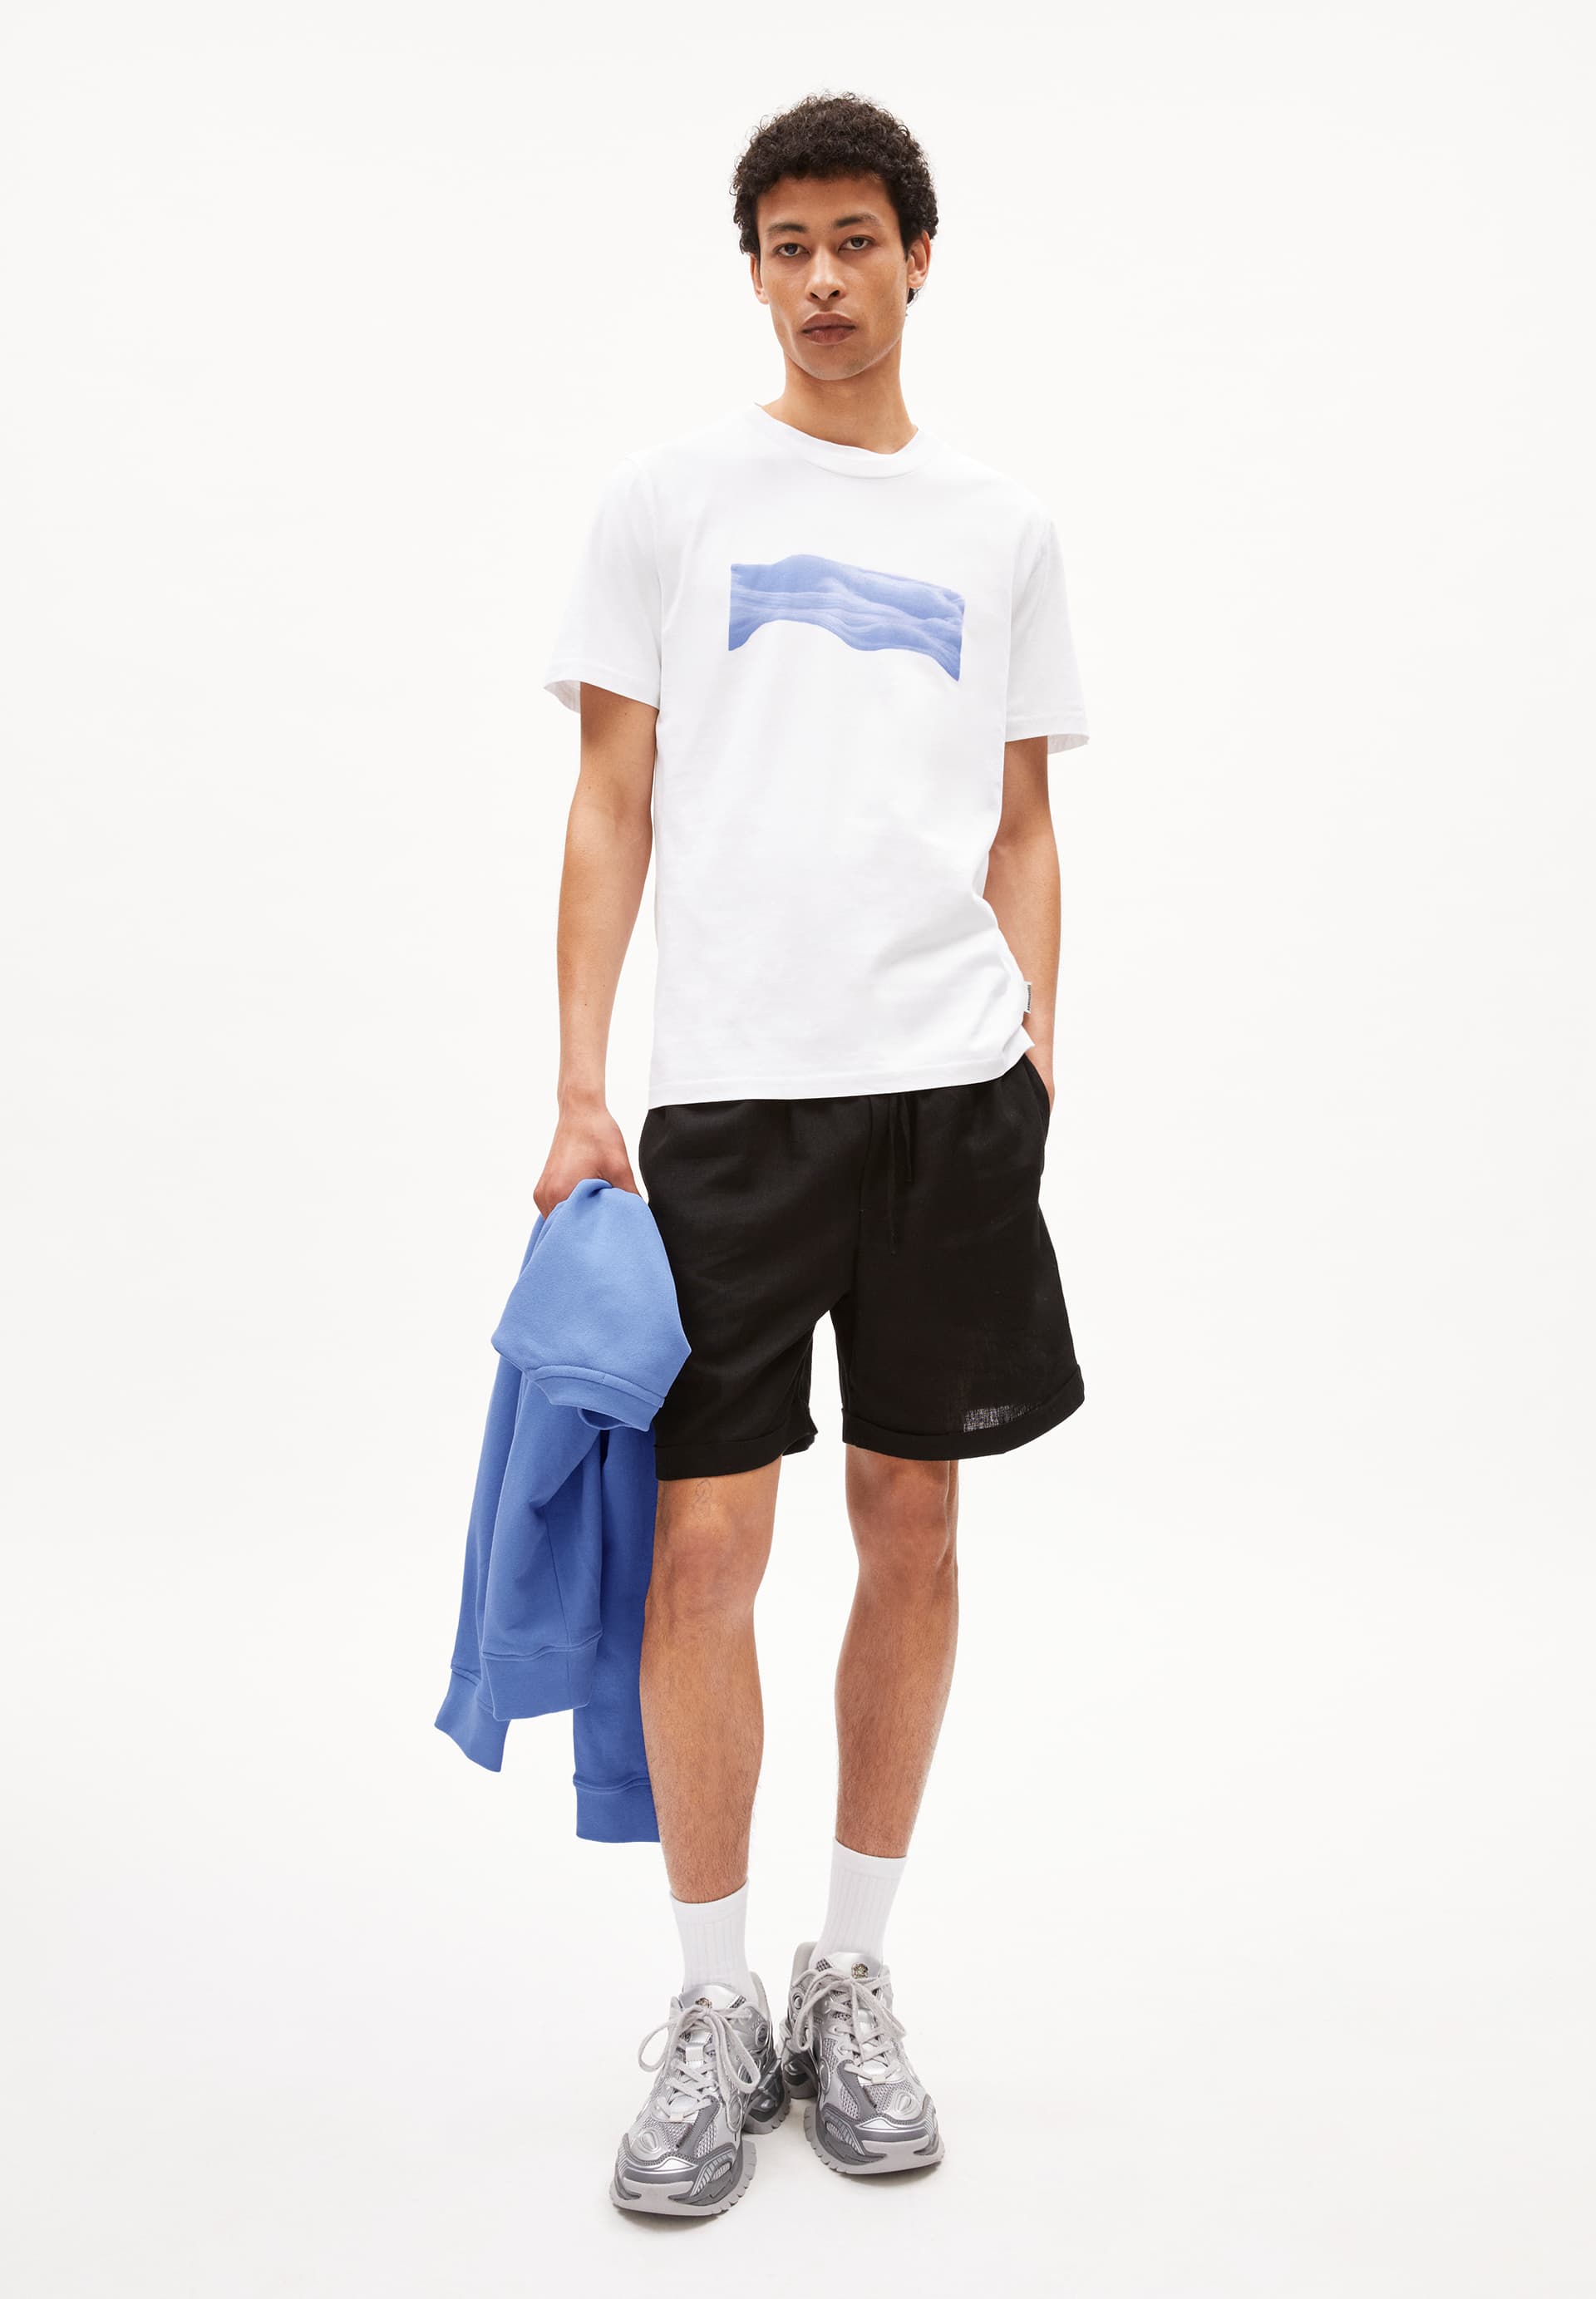 JAAMES WAVY CLOUDS T-Shirt Regular Fit made of Organic Cotton